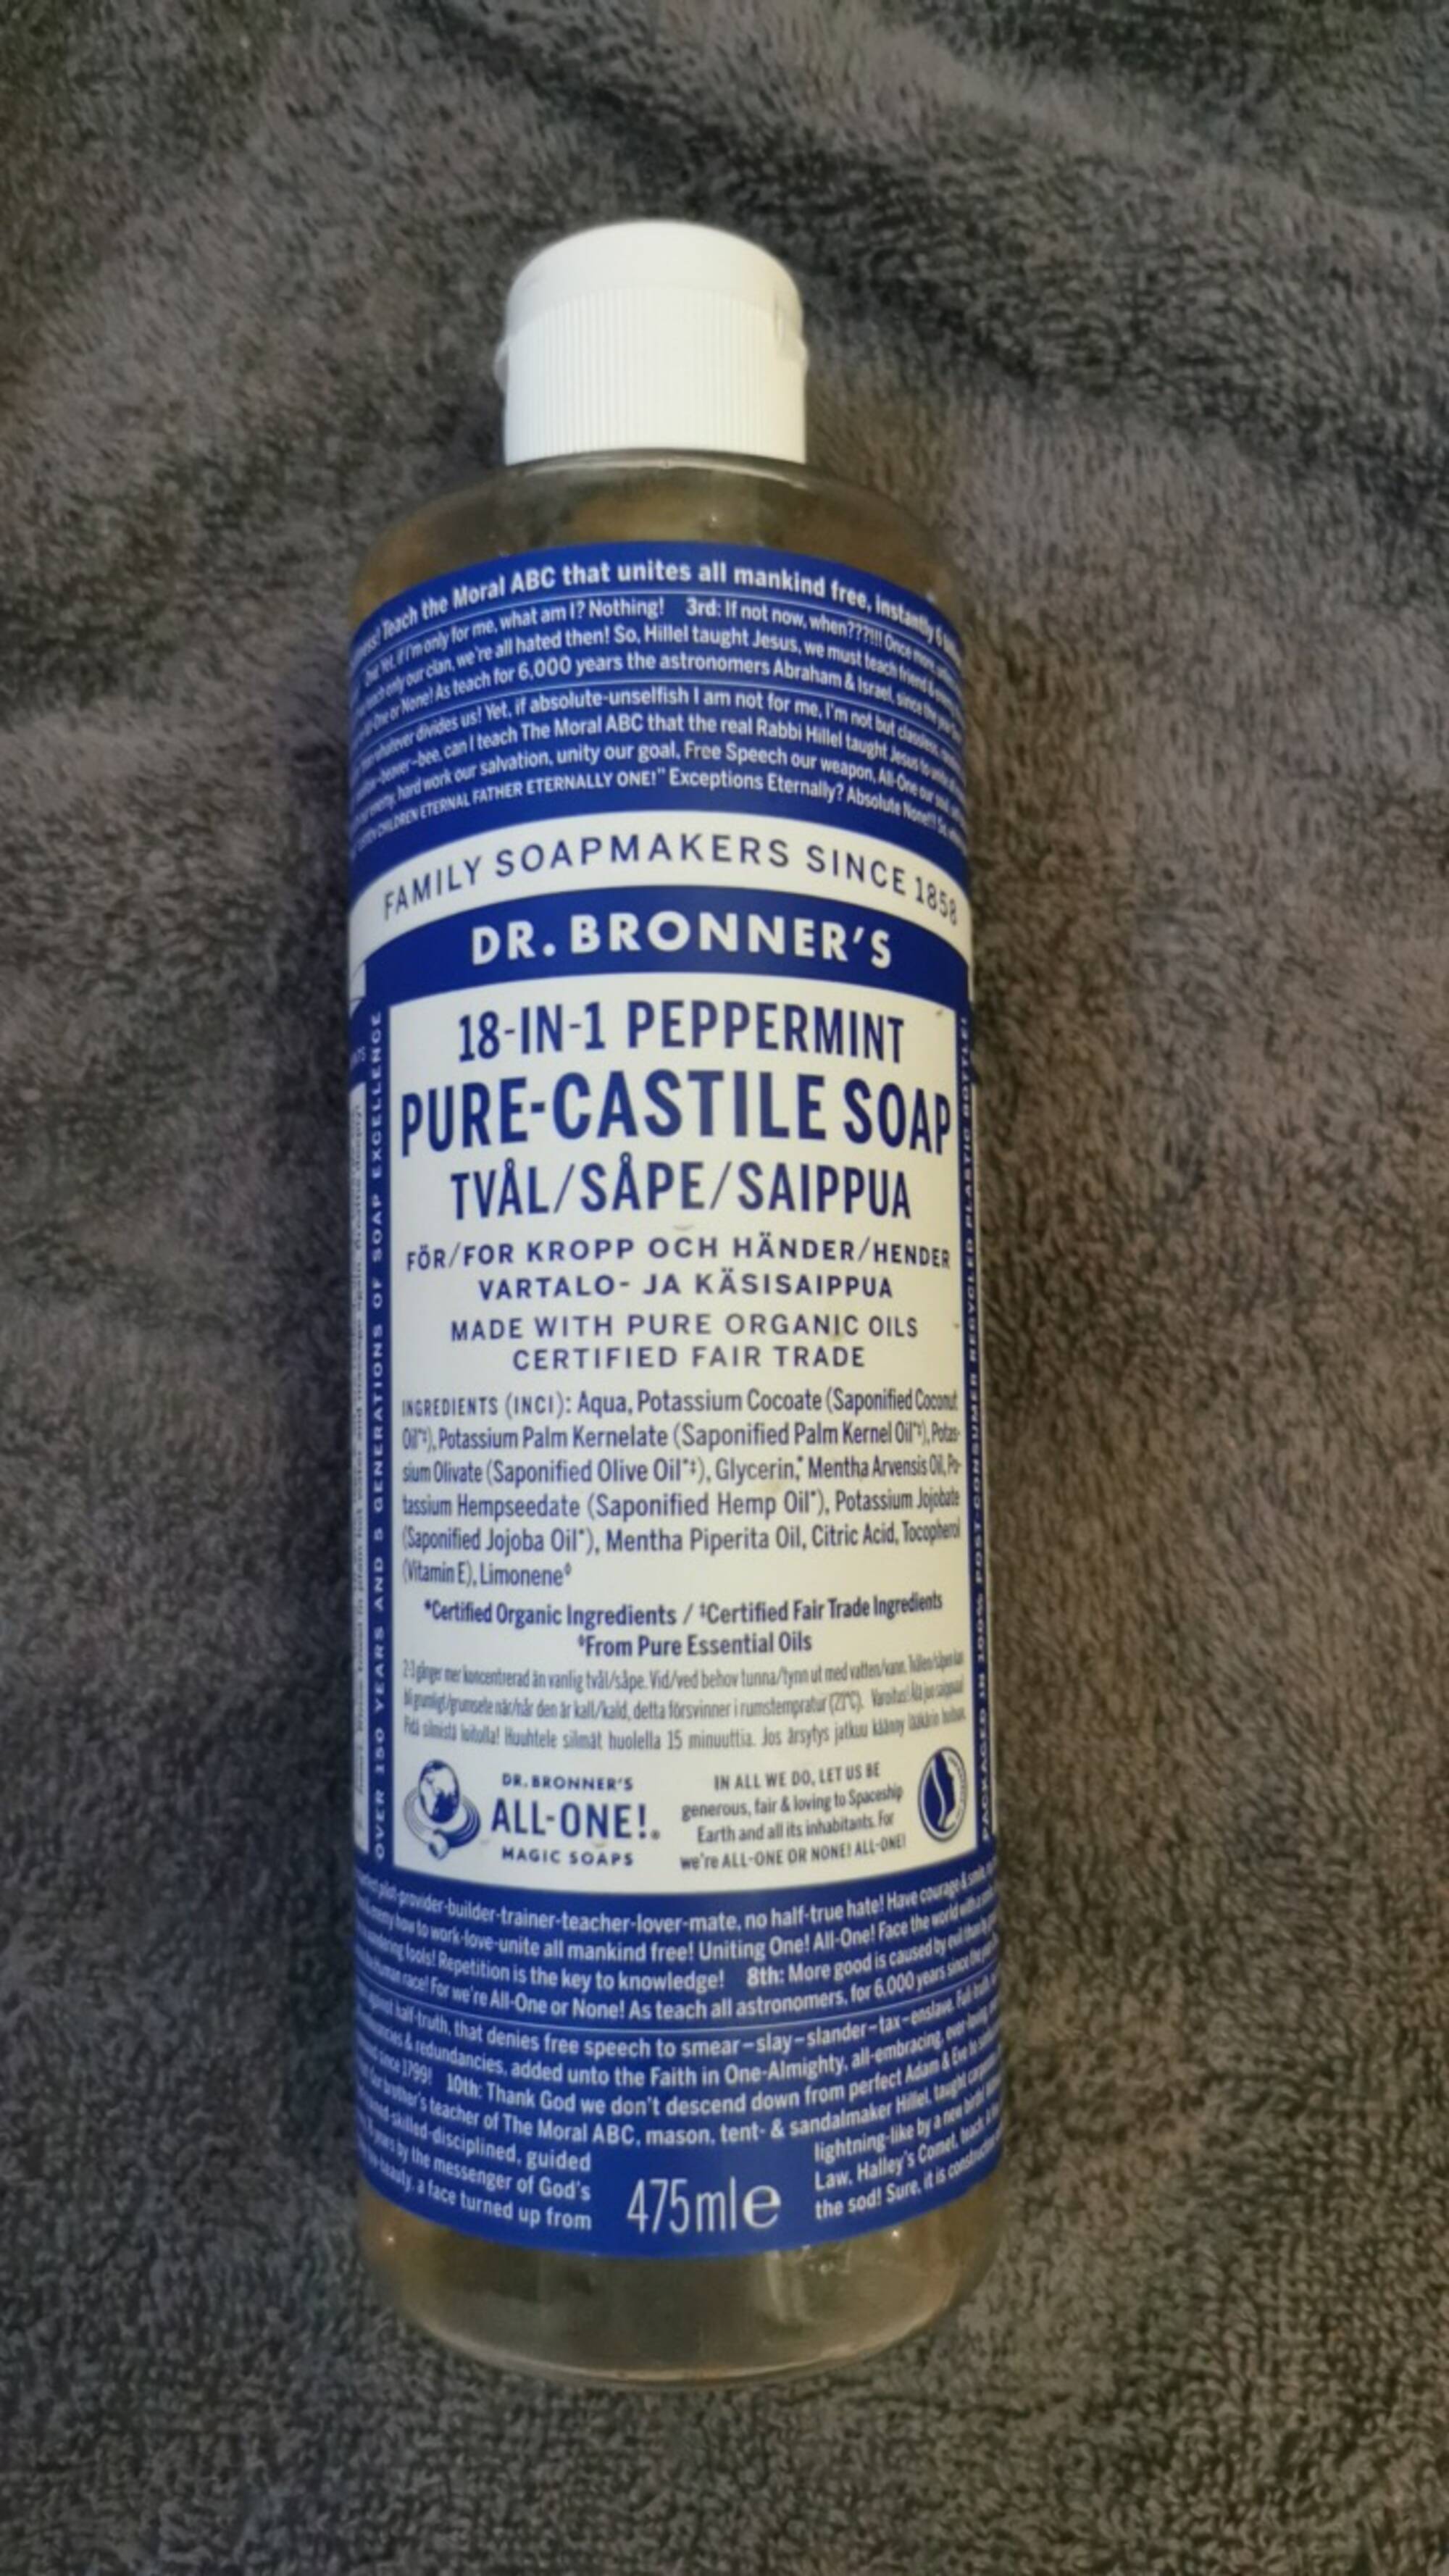 DR. BRONNER'S - 18 in 1 peppermint - Pure-castile soap  